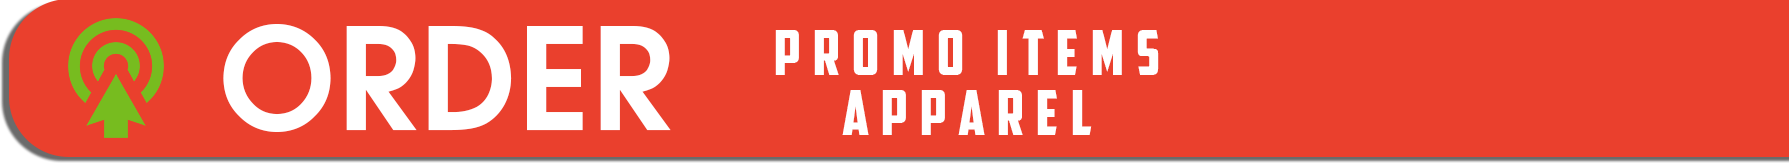 order promo product apparel